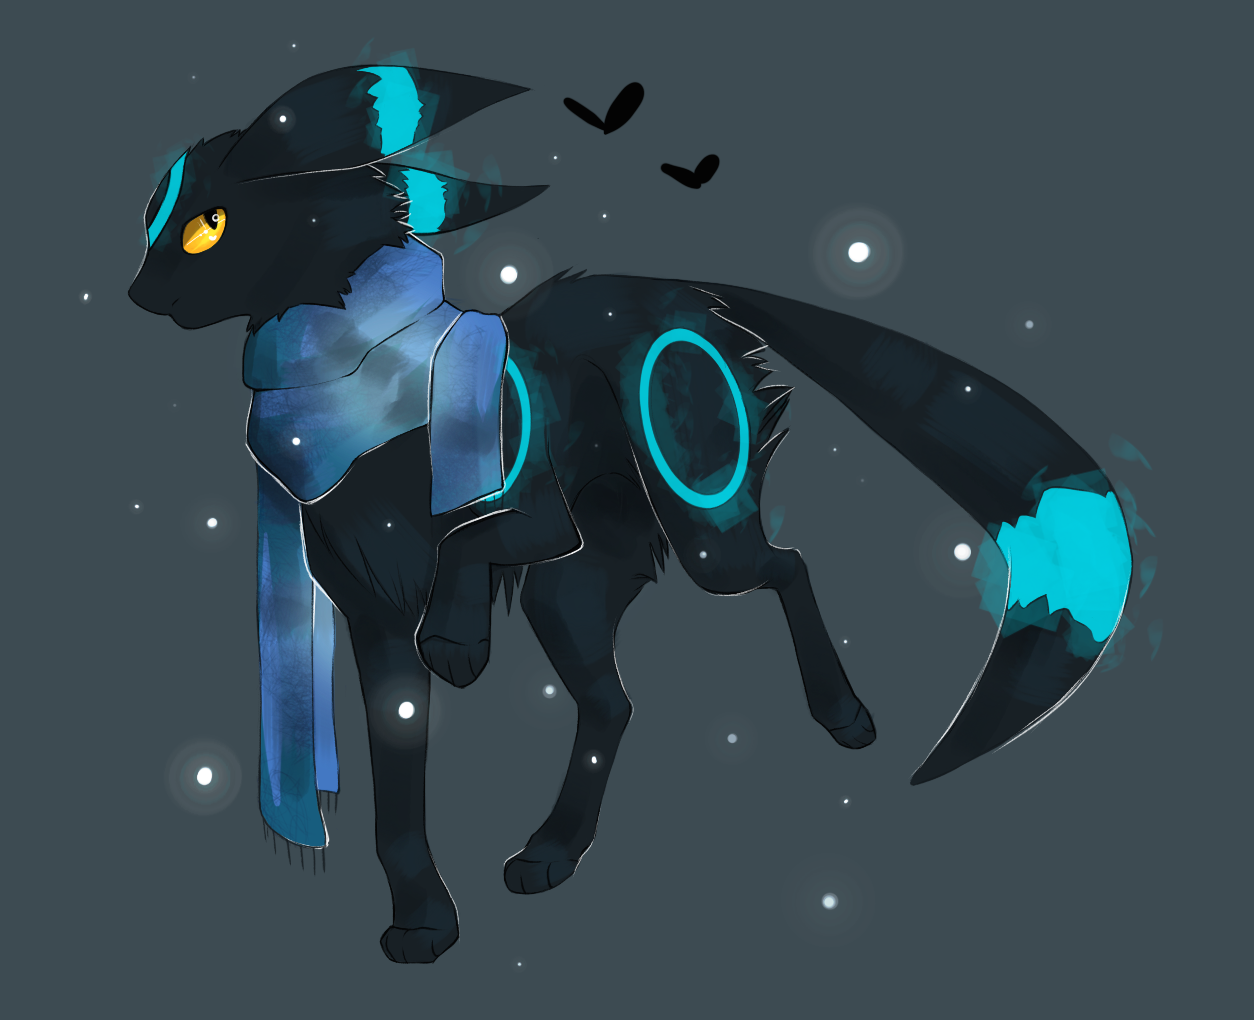 Shiny Umbreon with a scarf Blank Meme Template